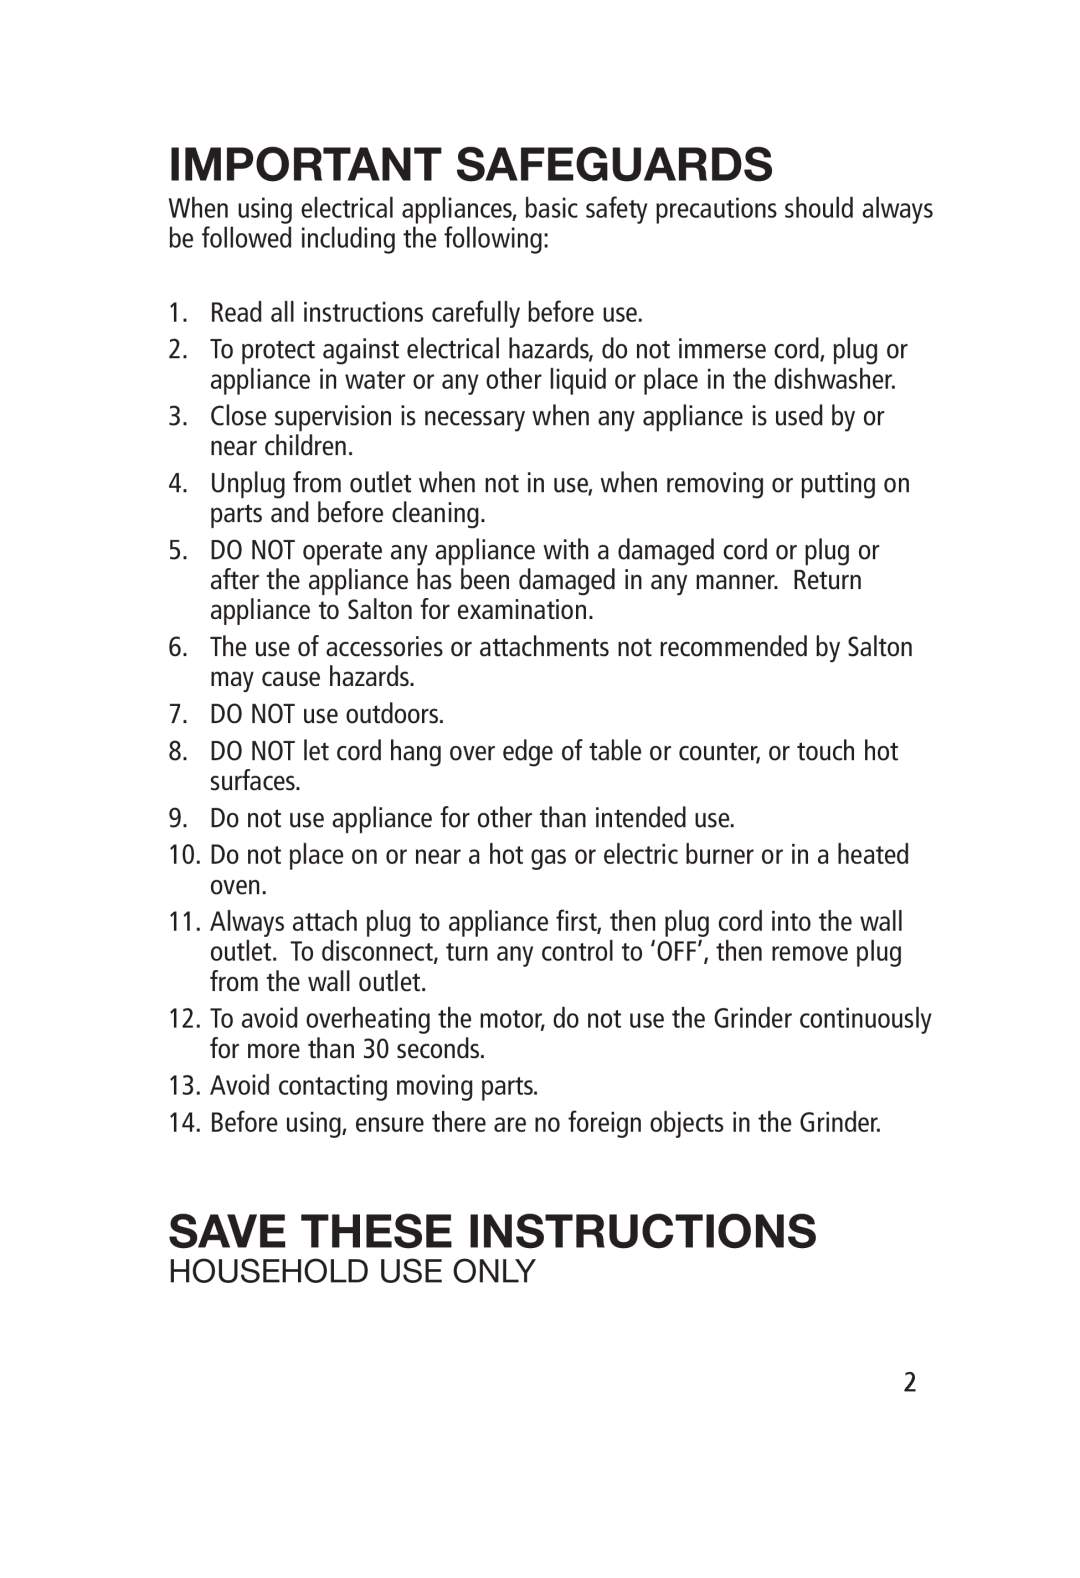 Salton CG-1174 manual Household Use Only, Important Safeguards, Save These Instructions 